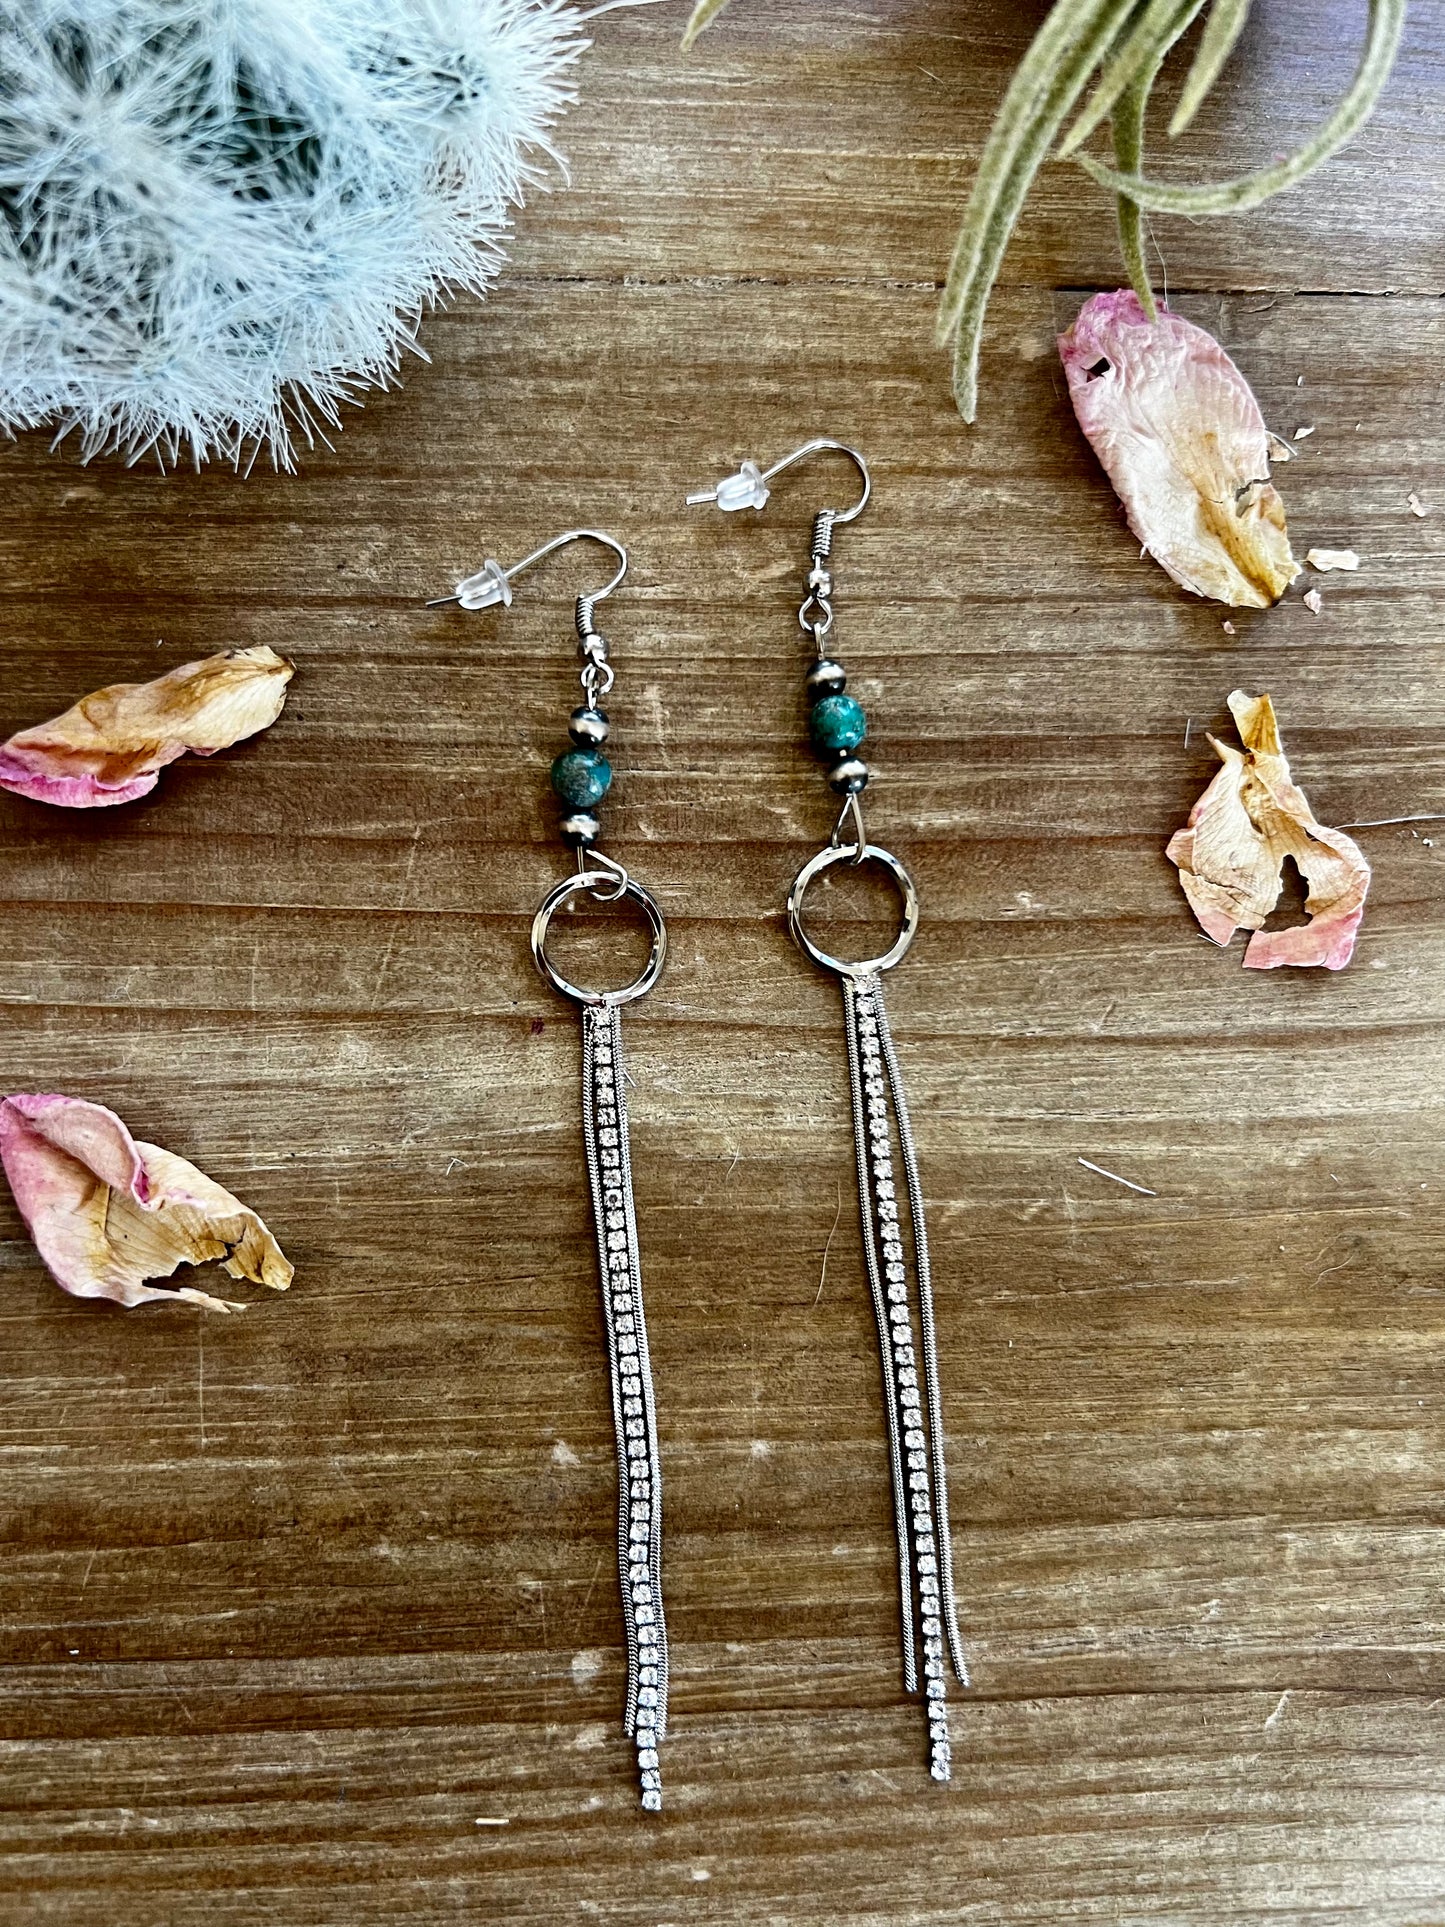 Chic dangle earrings with Navajo and turquoise